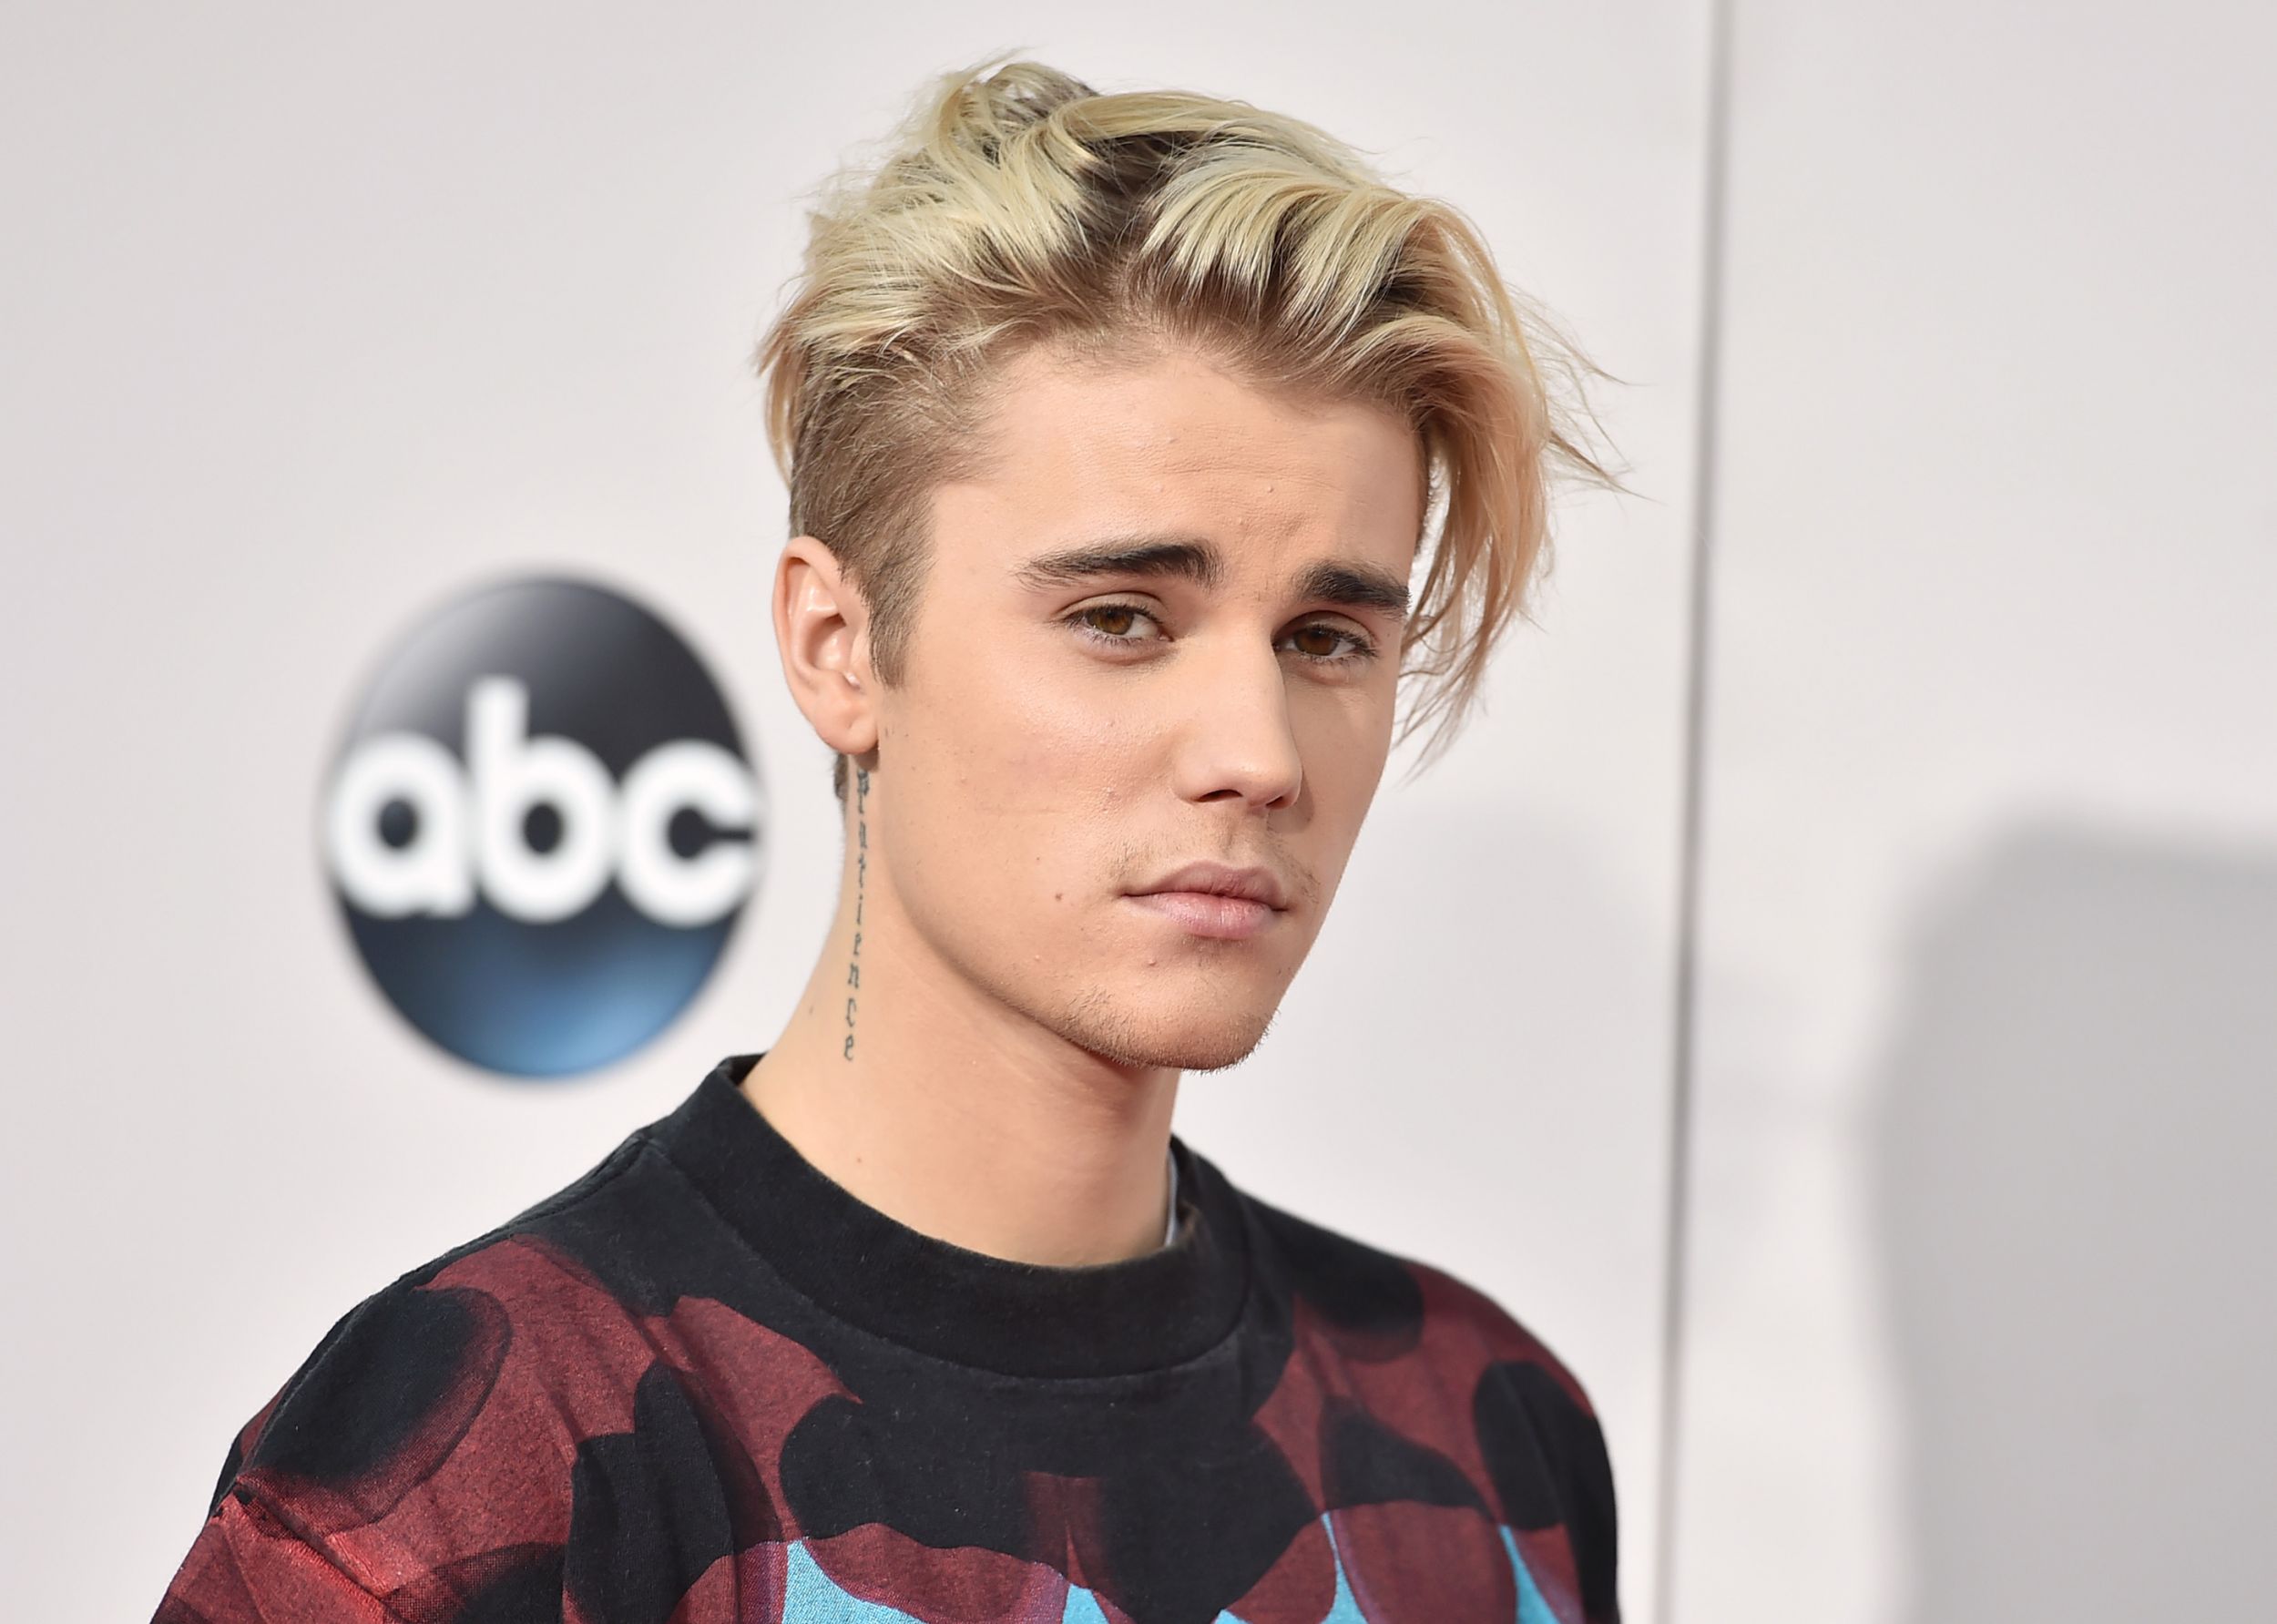 Justin Beiber puts India on the list for his music world tour